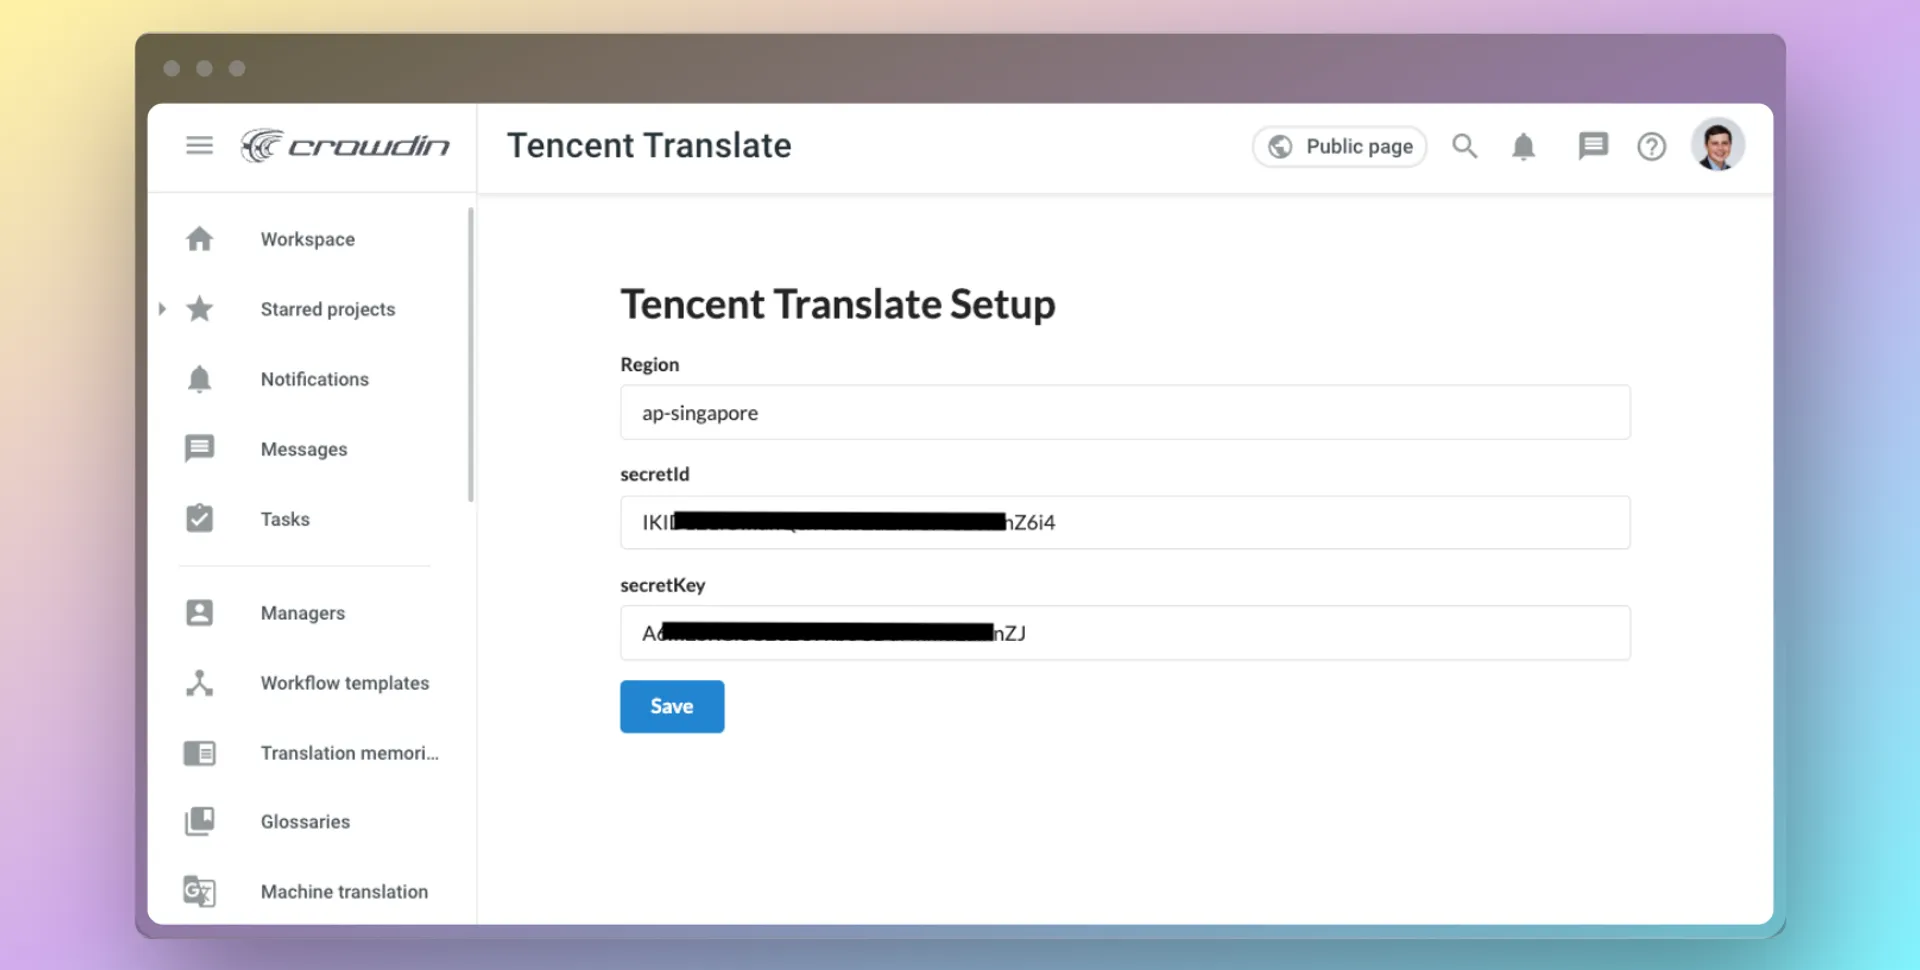 Tencent Translate in Crowdin